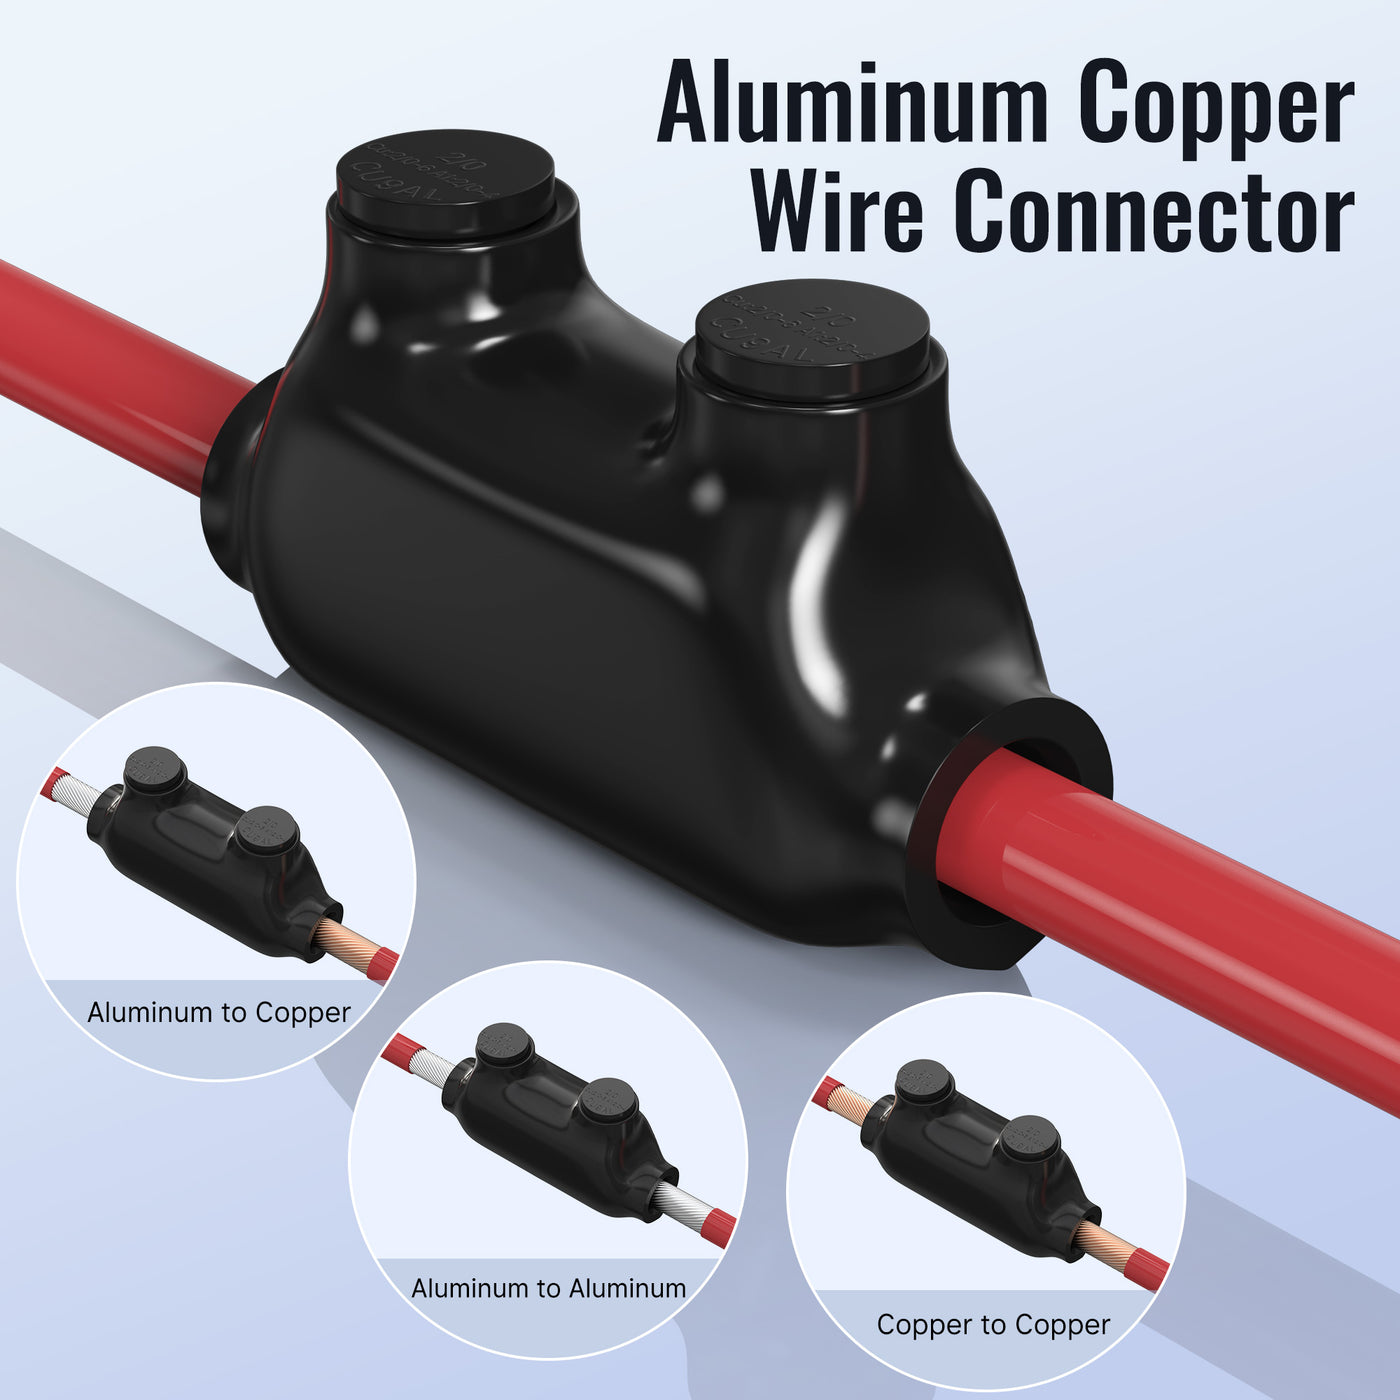 ITC-101-2 0AWG 2 0-6 Gauge Aluminum Copper Wire Connector